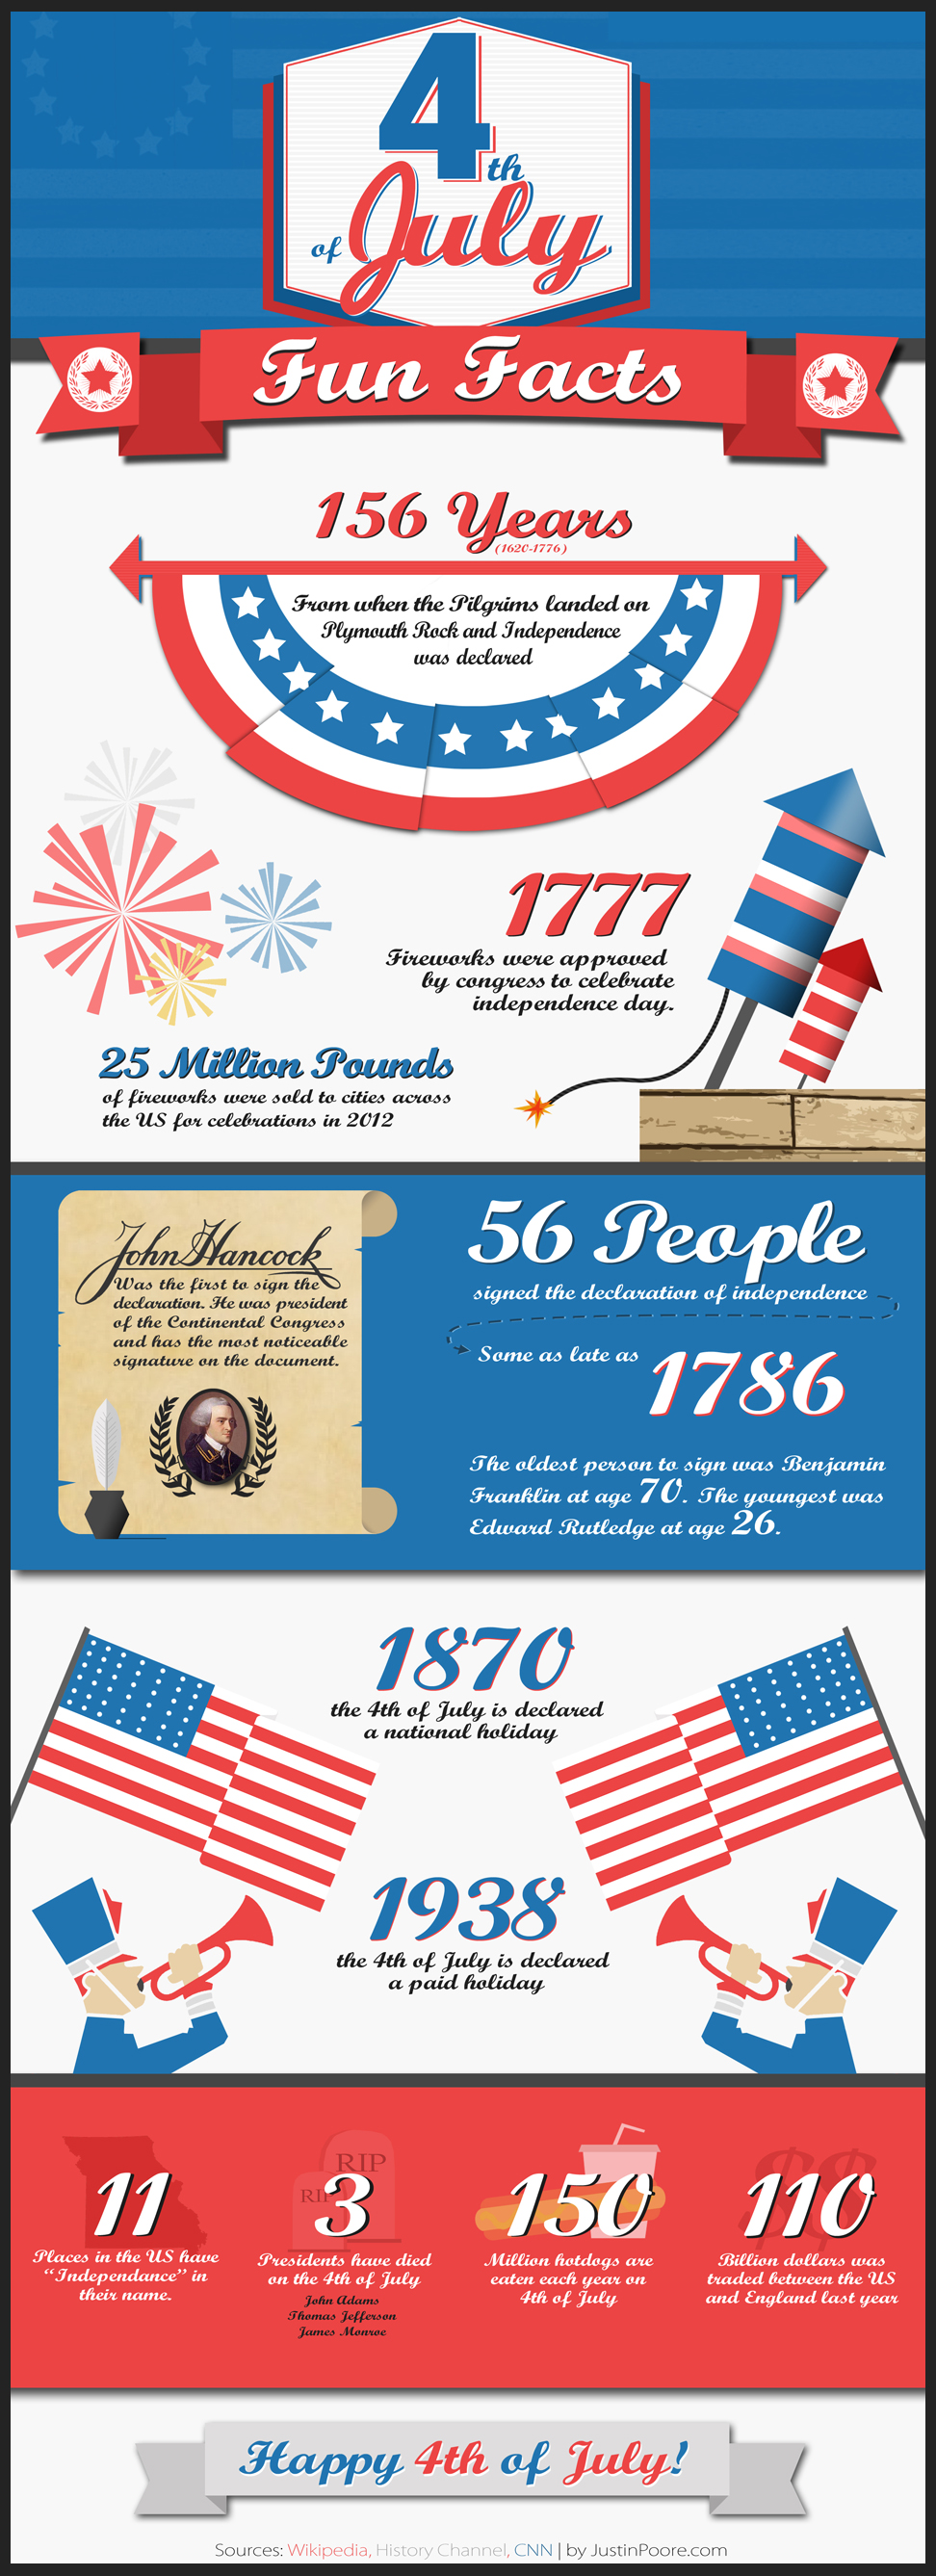 4th of July Fun Facts [Infographic]